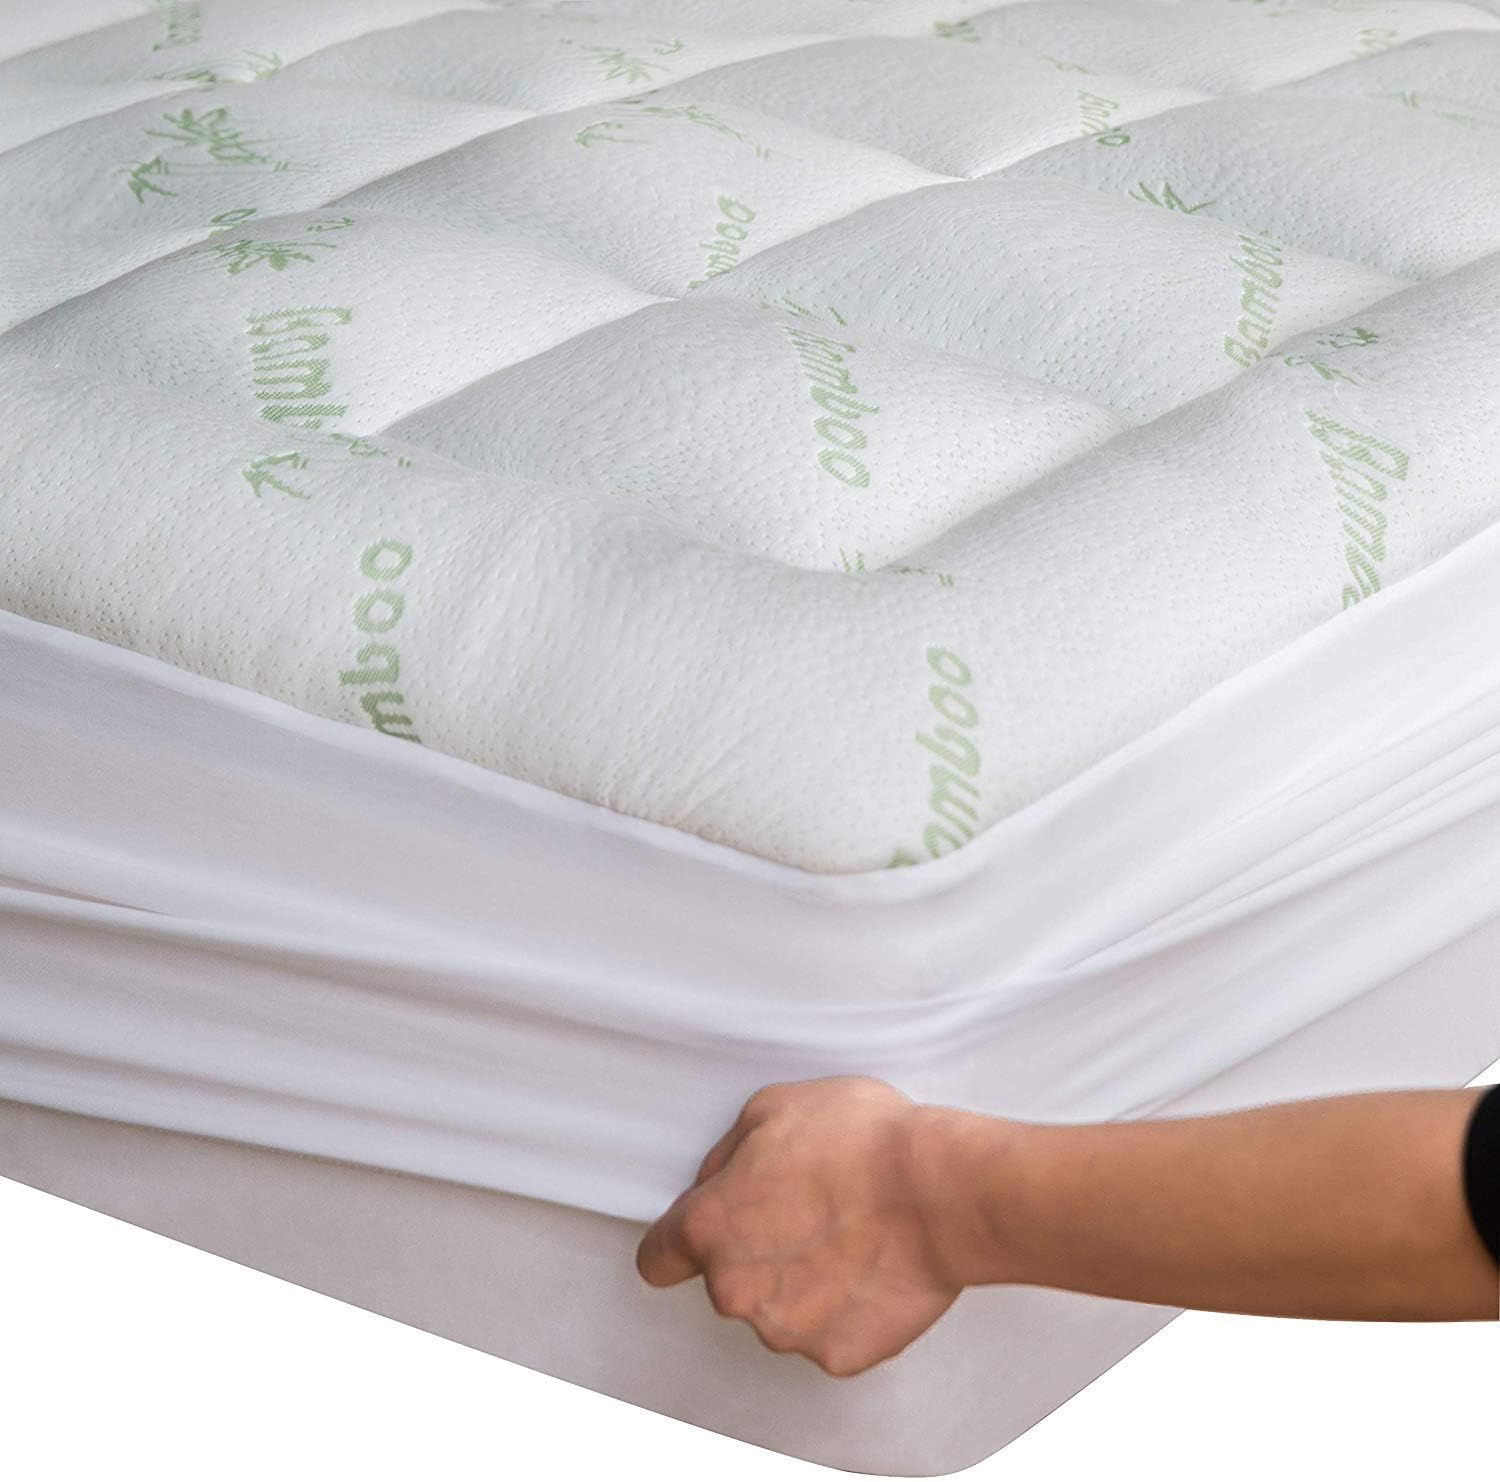 Bamboo California King Mattress Topper - Thick Cooling Breathable Pillow Top Mattress Pad for Back Pain Relief - Deep Pocket Topper Fits 8-20 Inches Mattress (Viscose Made from Bamboo, 72x84 Inches)